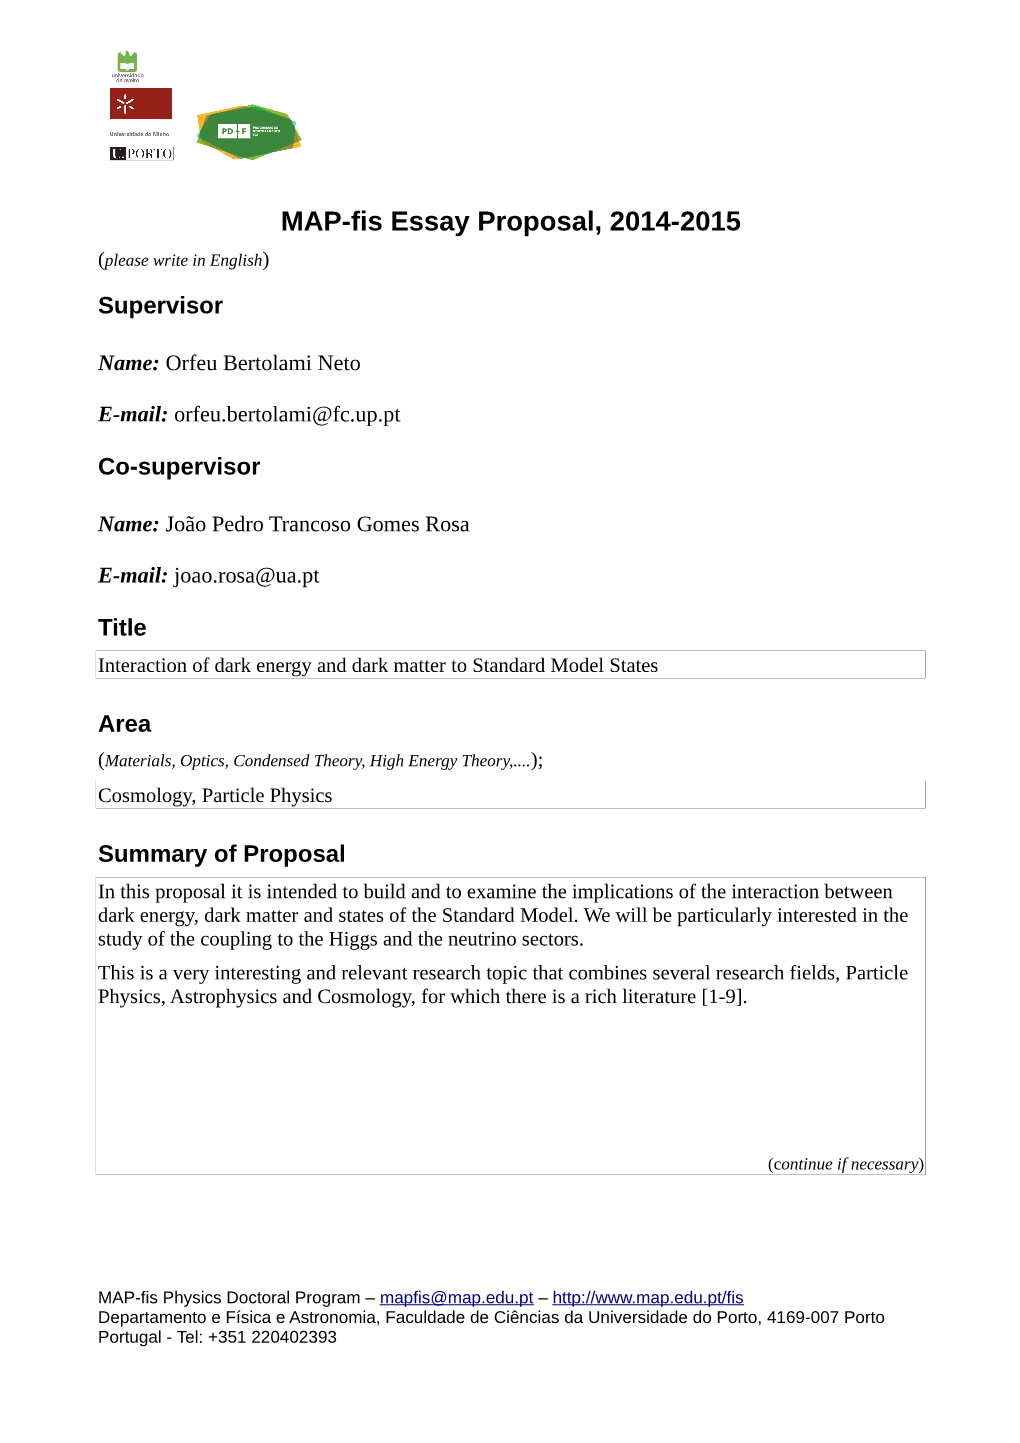 MAP-Fis Essay Proposal, 2014-2015 (Please Write in English)